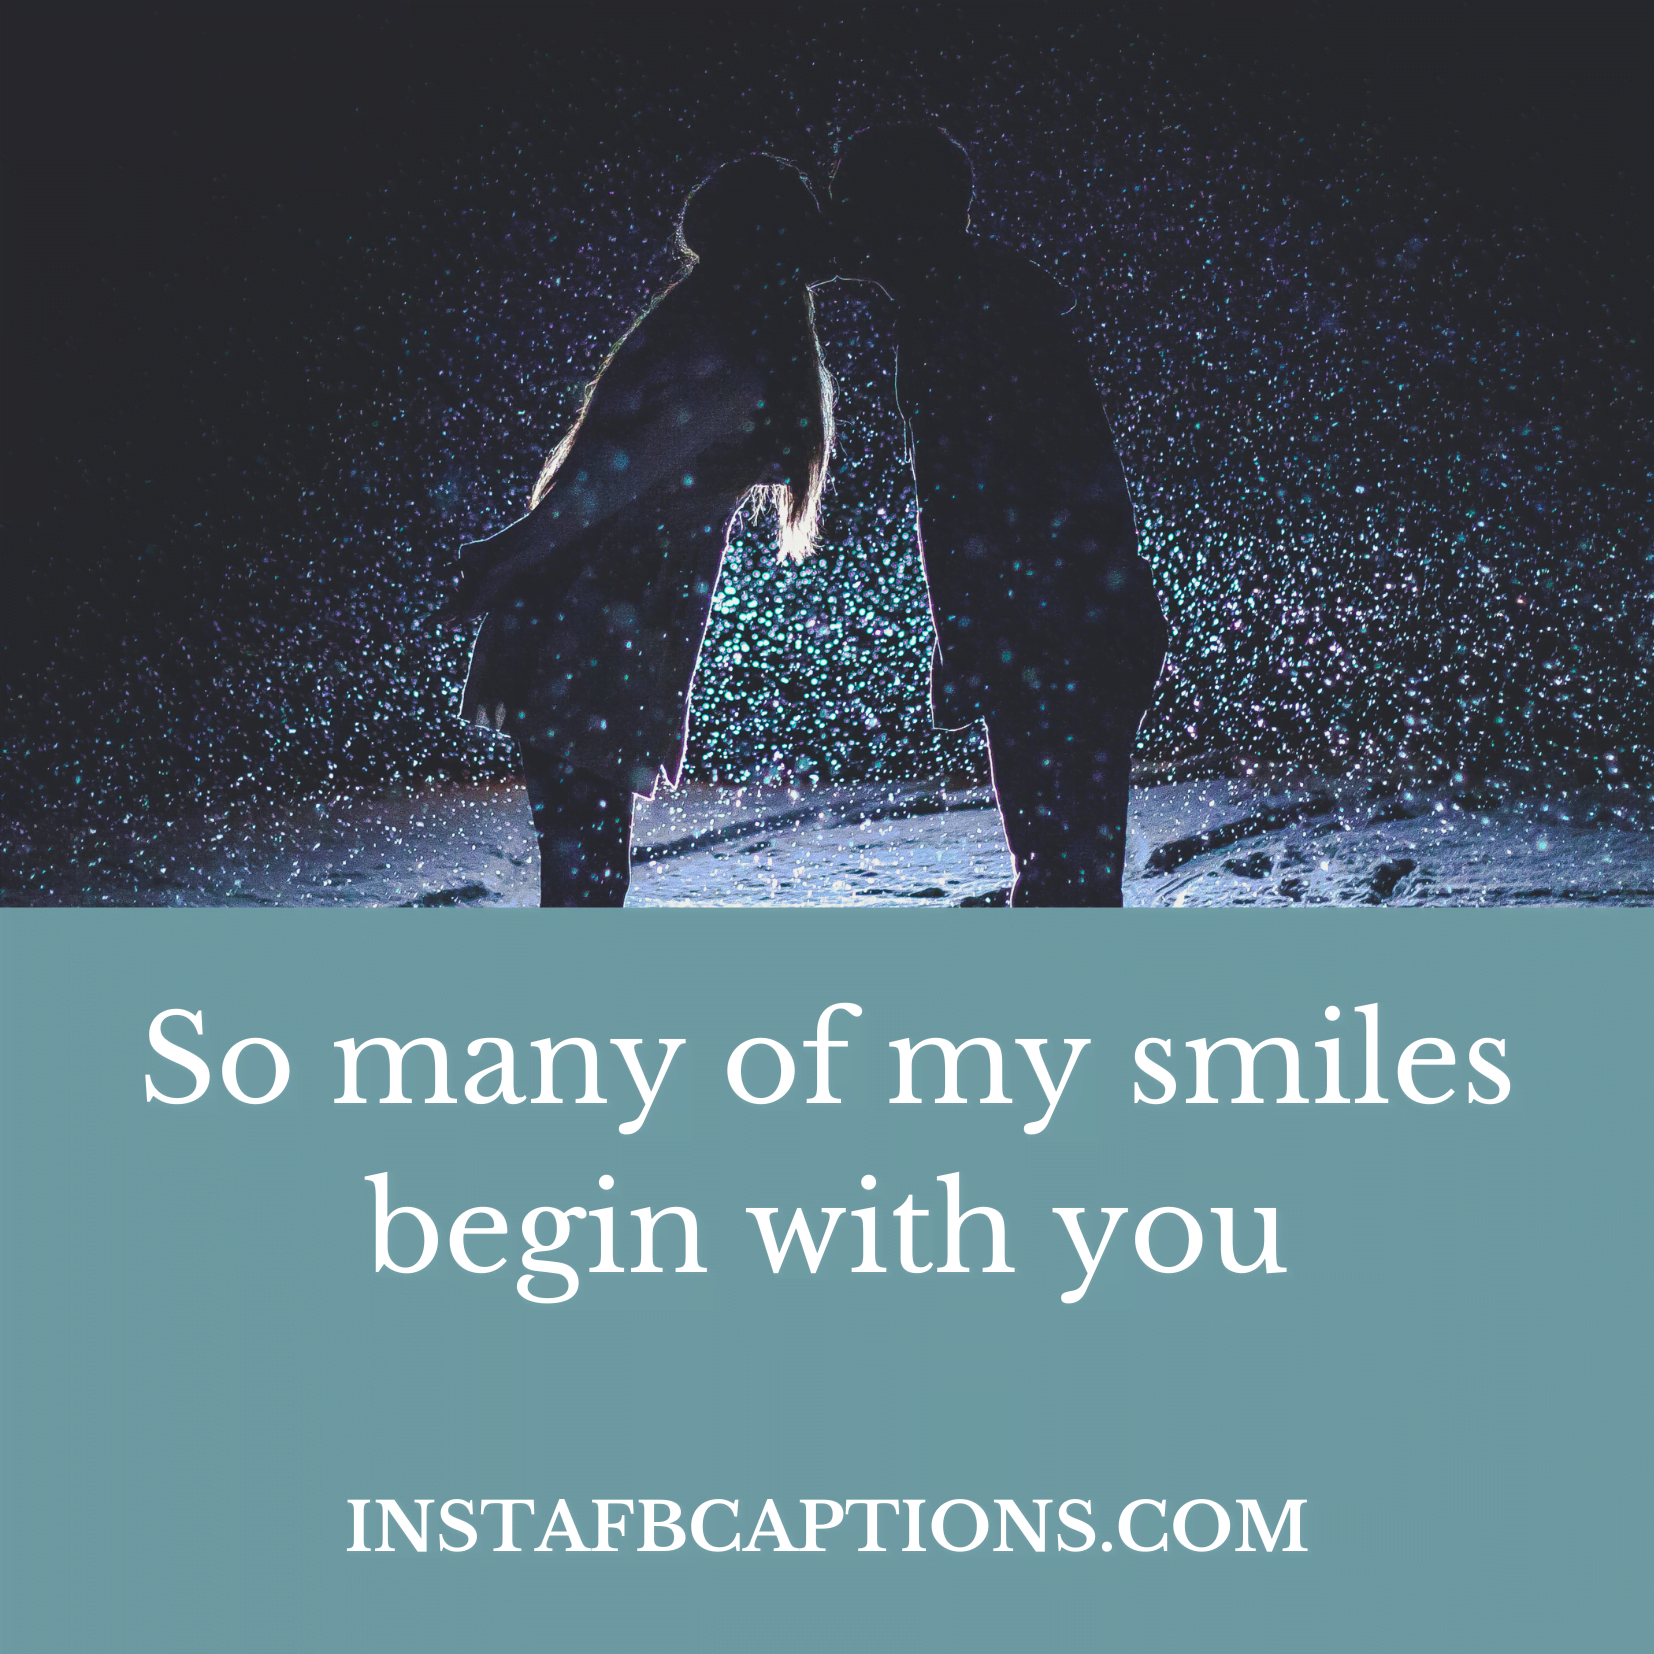 Funny Captions For Instagram Pictures  - Funny Captions for Instagram Pictures - Instagram Captions for Couple Pictures &#038; Photos in 2022